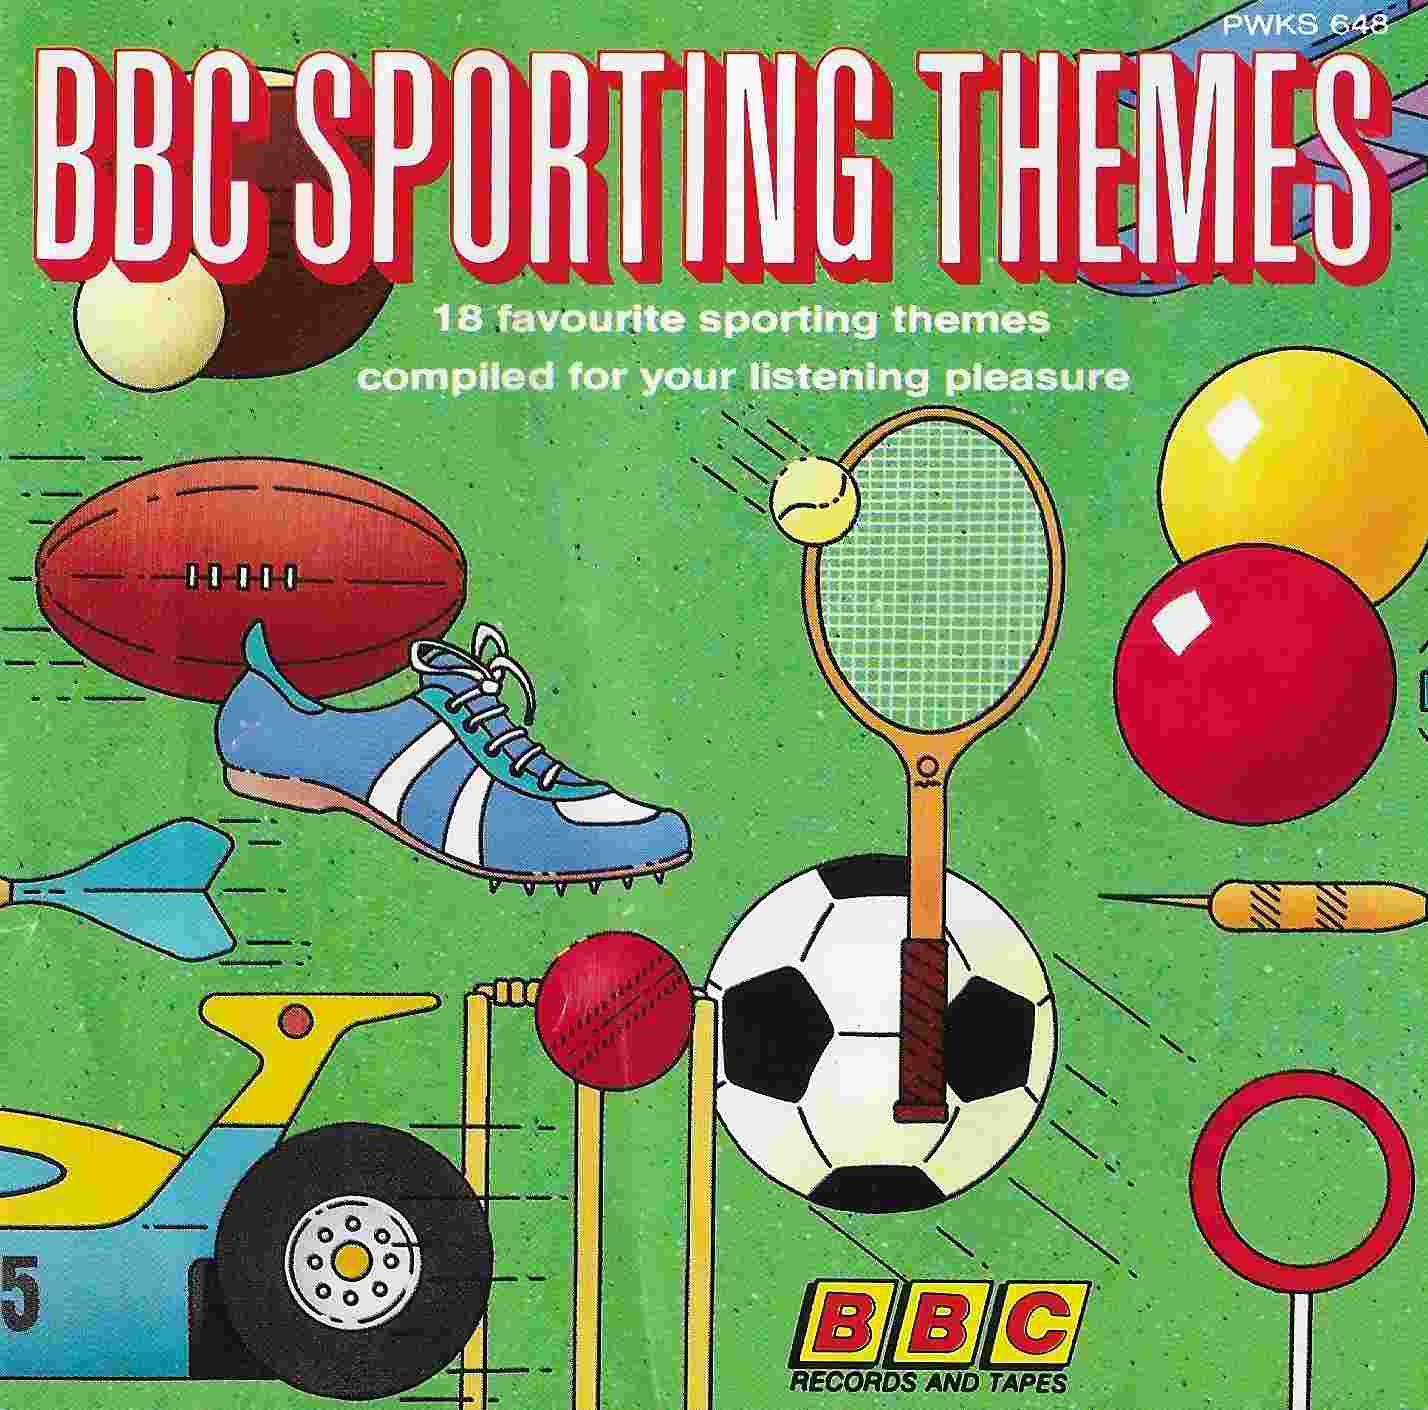 Picture of PWKS 648 BBC sporting themes by artist Various from the BBC cds - Records and Tapes library